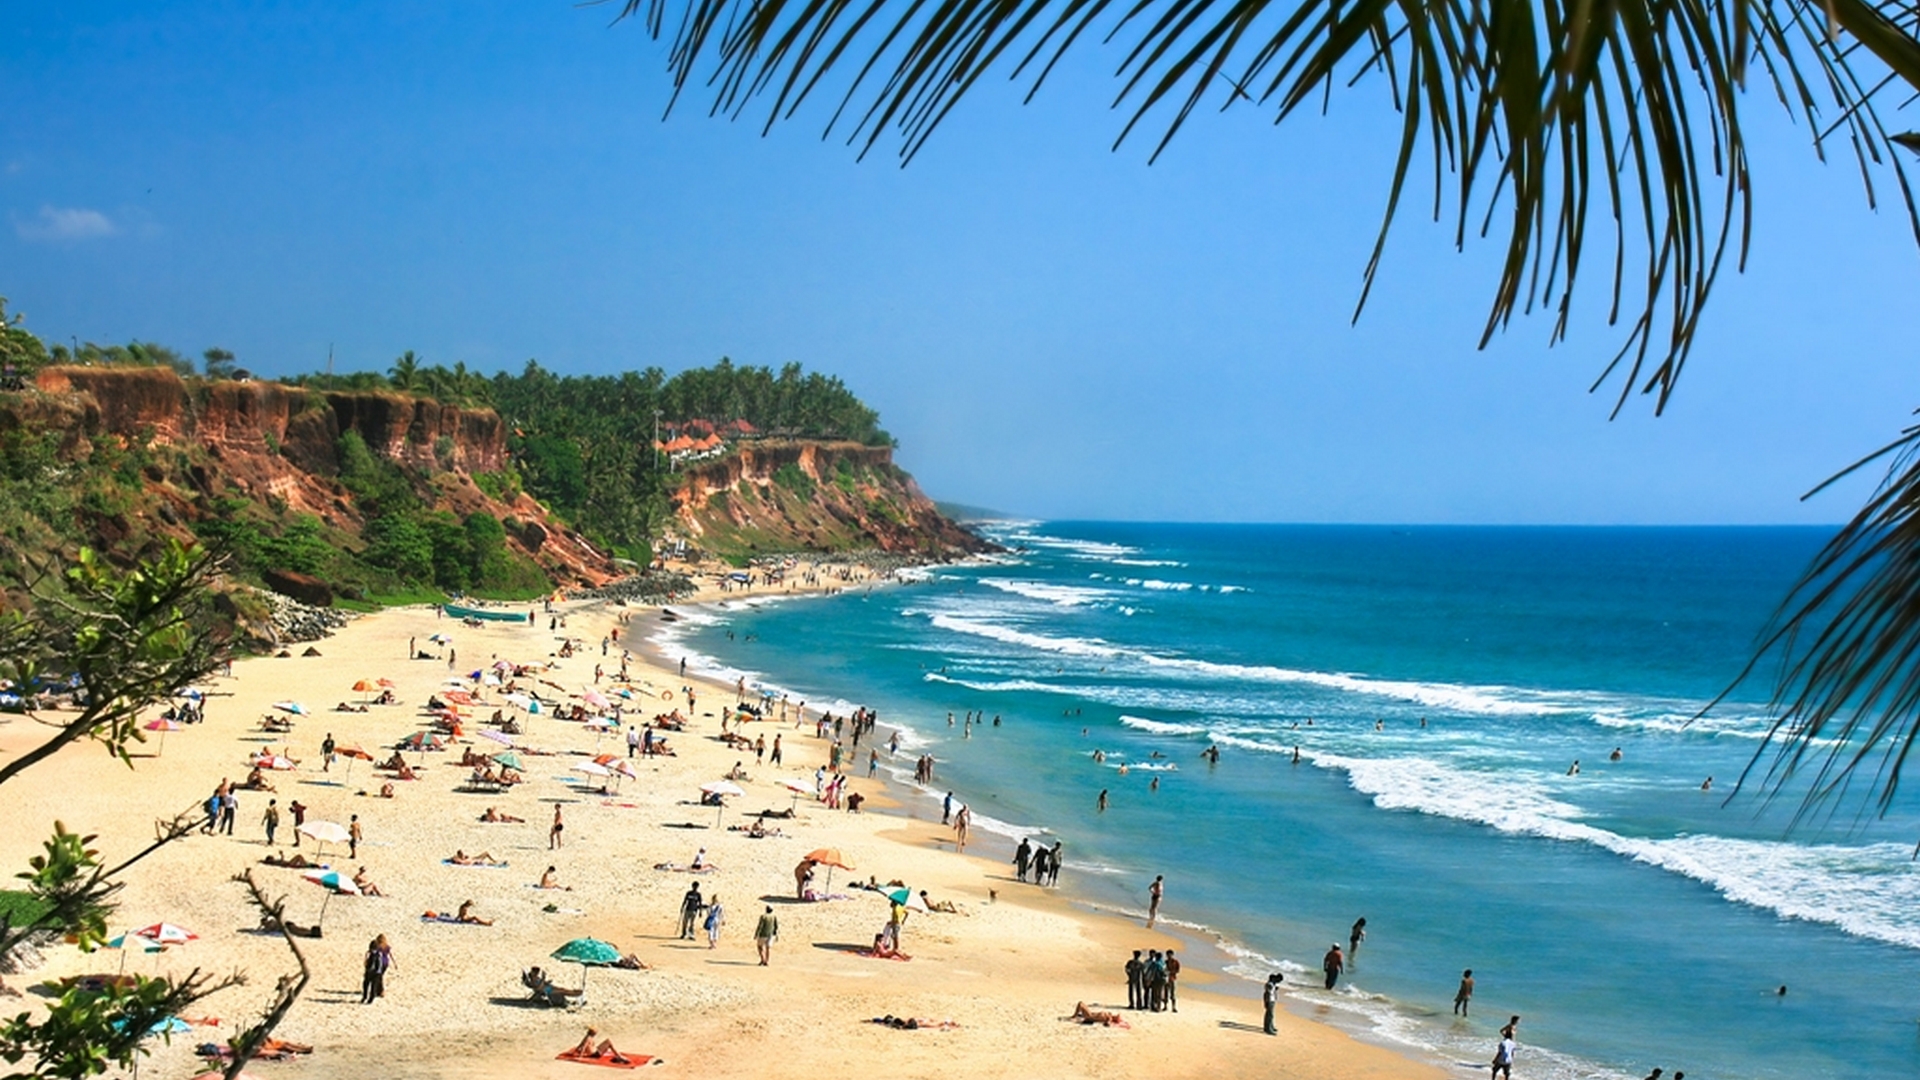 View of the Varkala Cliff from the seashore